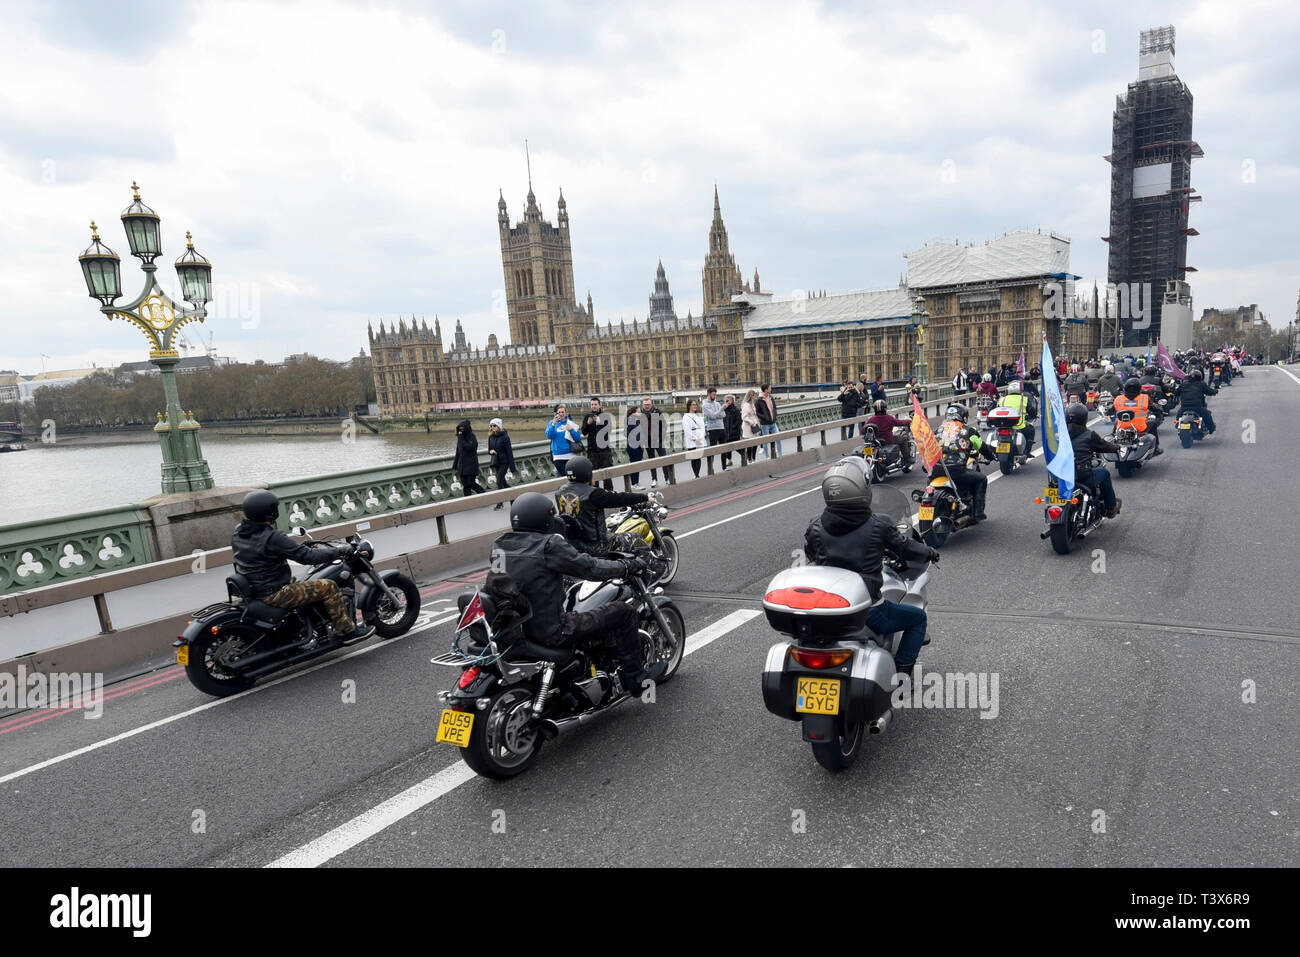 London, UK. 12th Apr 2019.Bikers cross Westminster Bridge.  Thousands of bikers take part in a rally called 'Rolling Thunder' in central London in support of 'Soldier F, a 77-year-old Army veteran who faces charges of murder after killing two civil rights demonstrators in Londonderry, Northern Ireland, in 1972, on what became known as Bloody Sunday. Credit: Stephen Chung/Alamy Live News Stock Photo